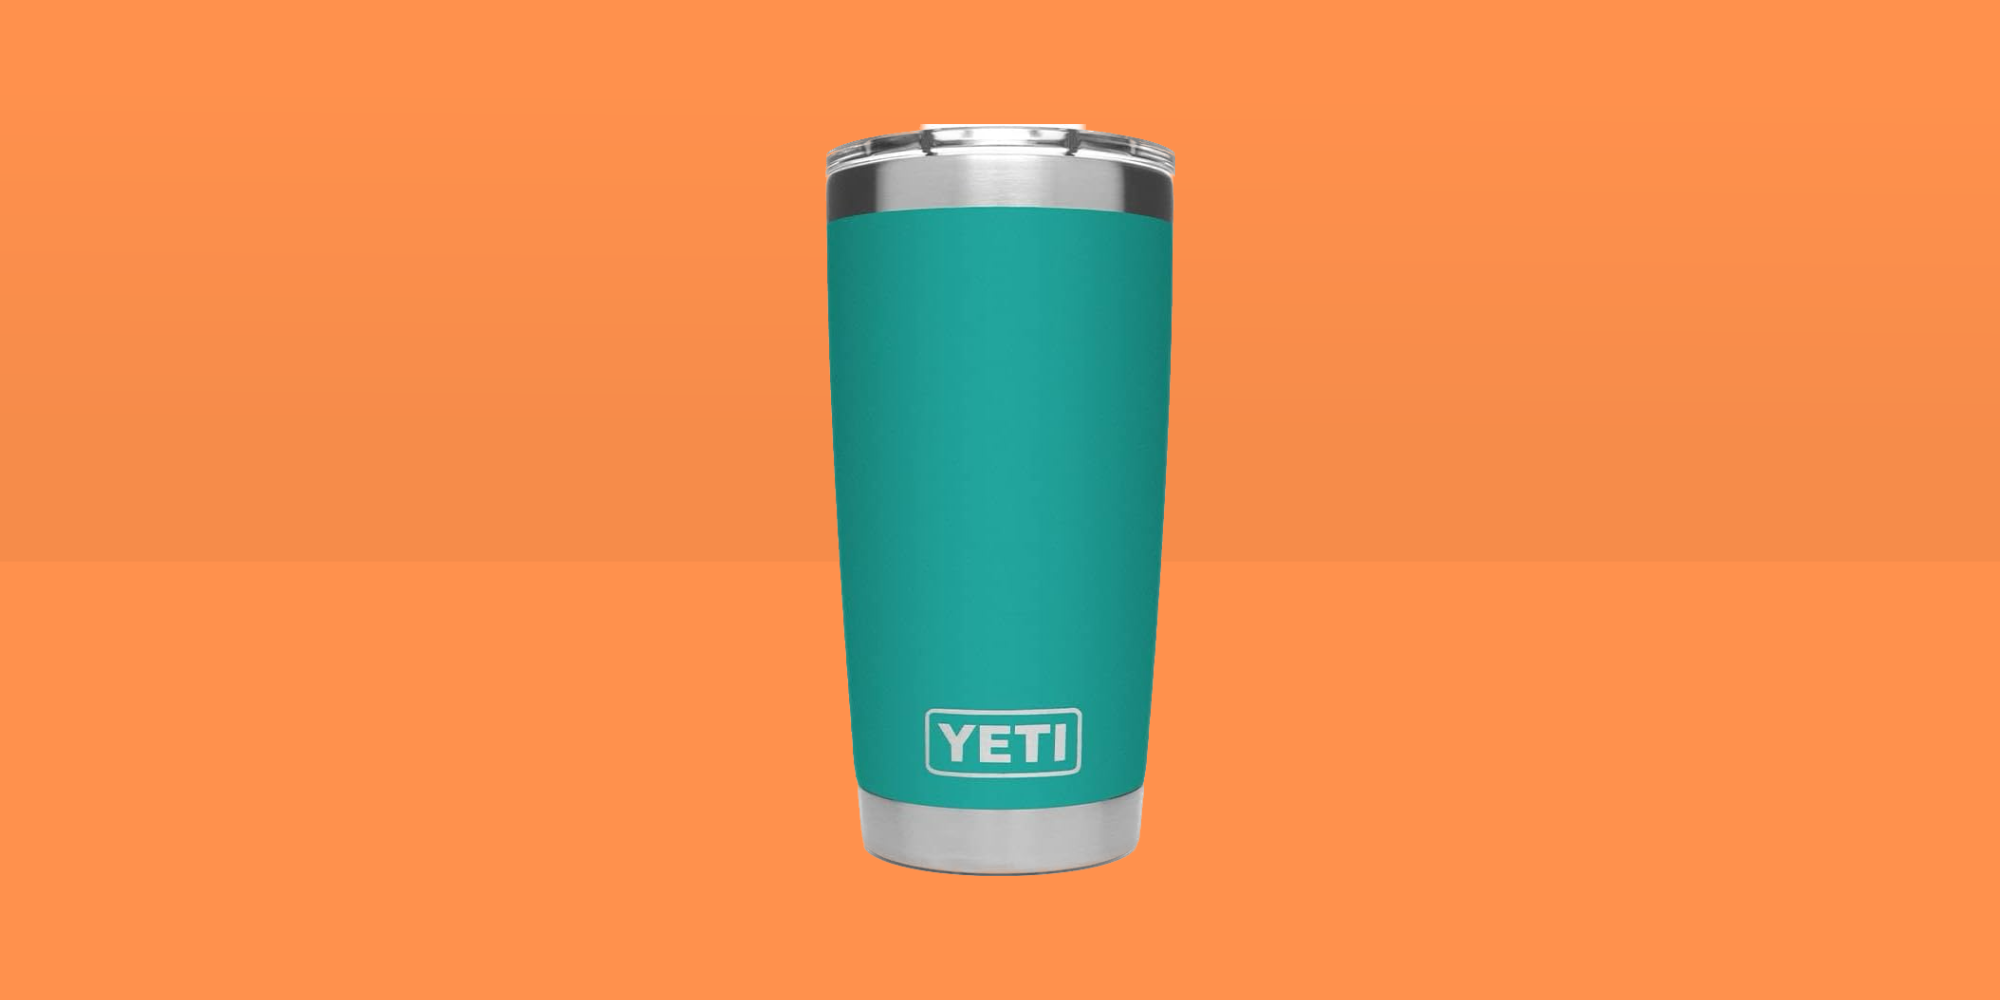 YETI steel tumblers and bottles are some of the best, rare Prime Day deals  now live from $14